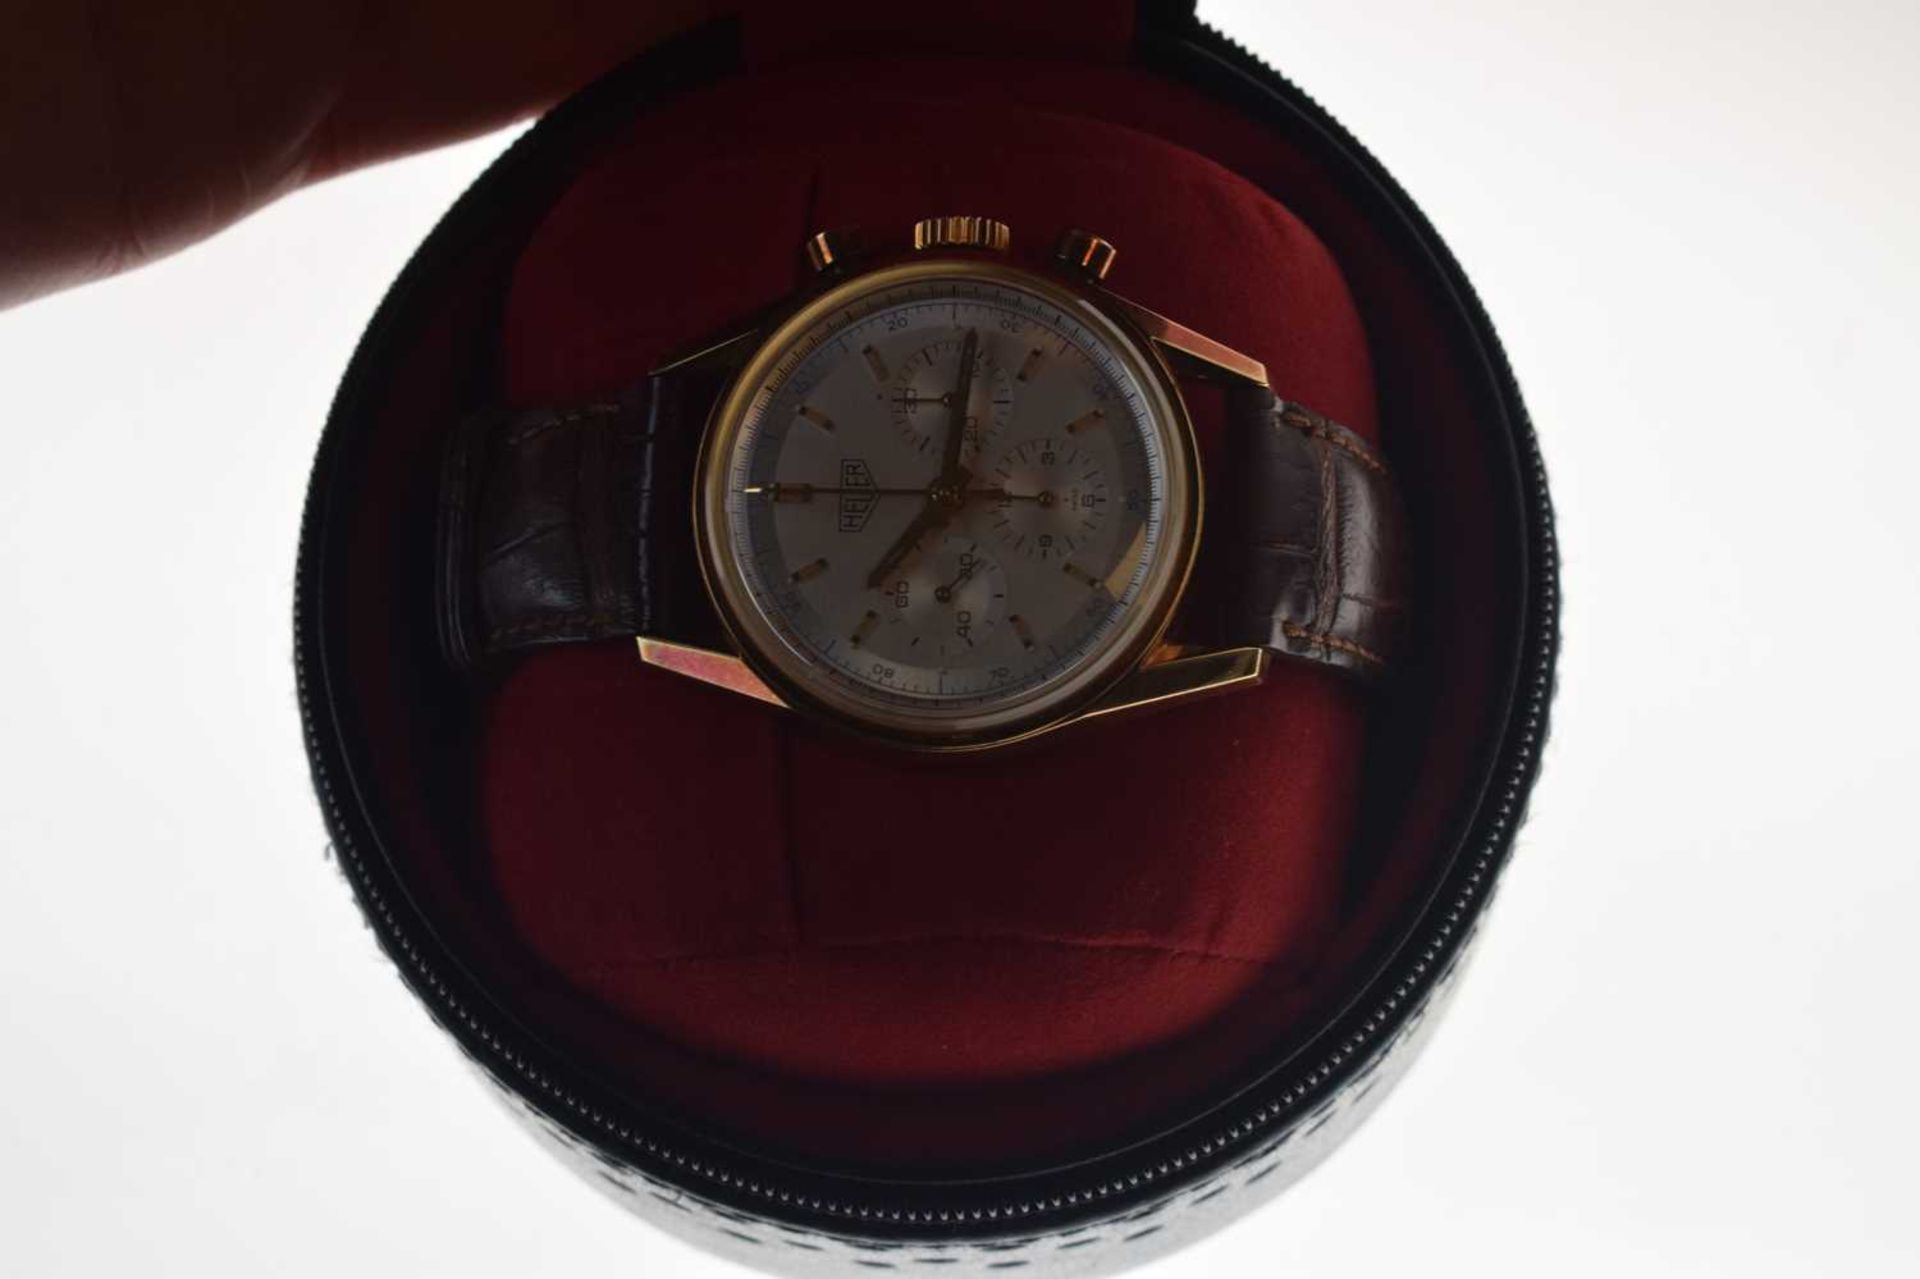 Heuer Carrera - Gentleman's chronograph 18K cased limited edition wristwatch - Image 10 of 12